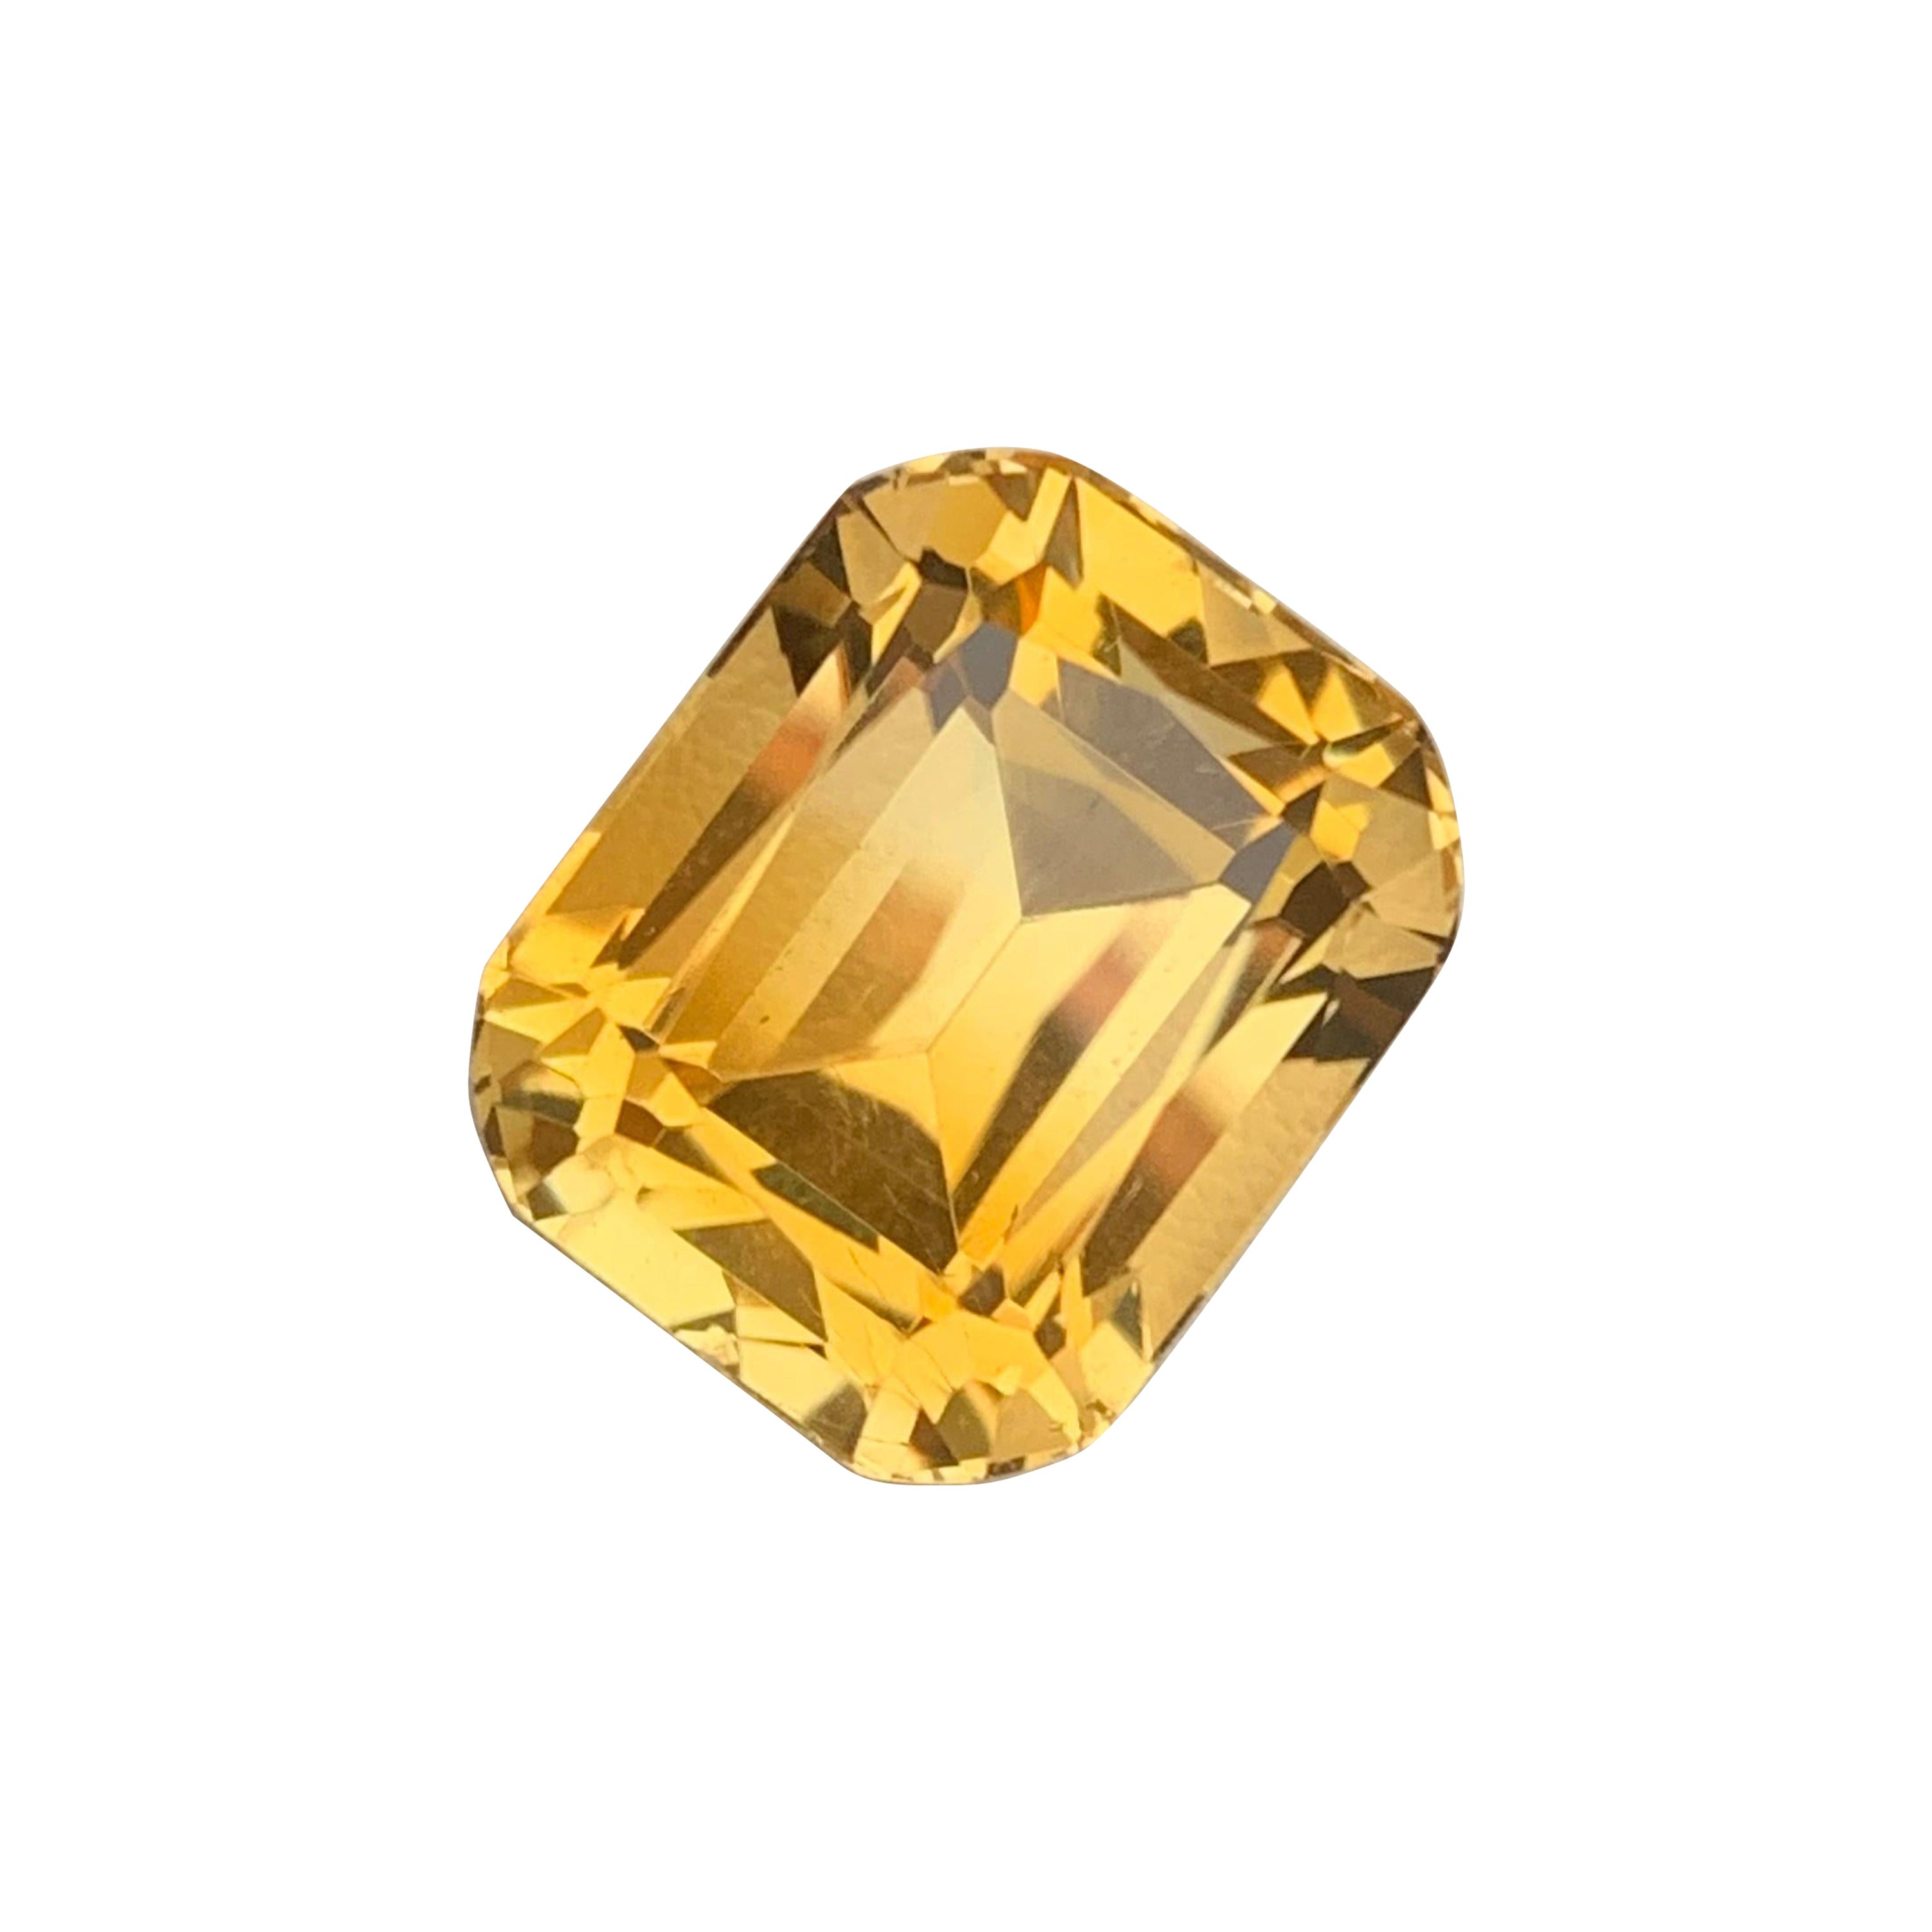 Faceted Citrine
Weight : 14.20 Carats
Dimensions : 15.3x12.4x11 Mm
Clarity : Eye Clean 
Origin : Brazil
Color: Yellow 
Shape: Cushion 
Certificate: On Demand
Month: November
.
The Many Healing Properties of Citrine
Increase Optimism, And Sunny